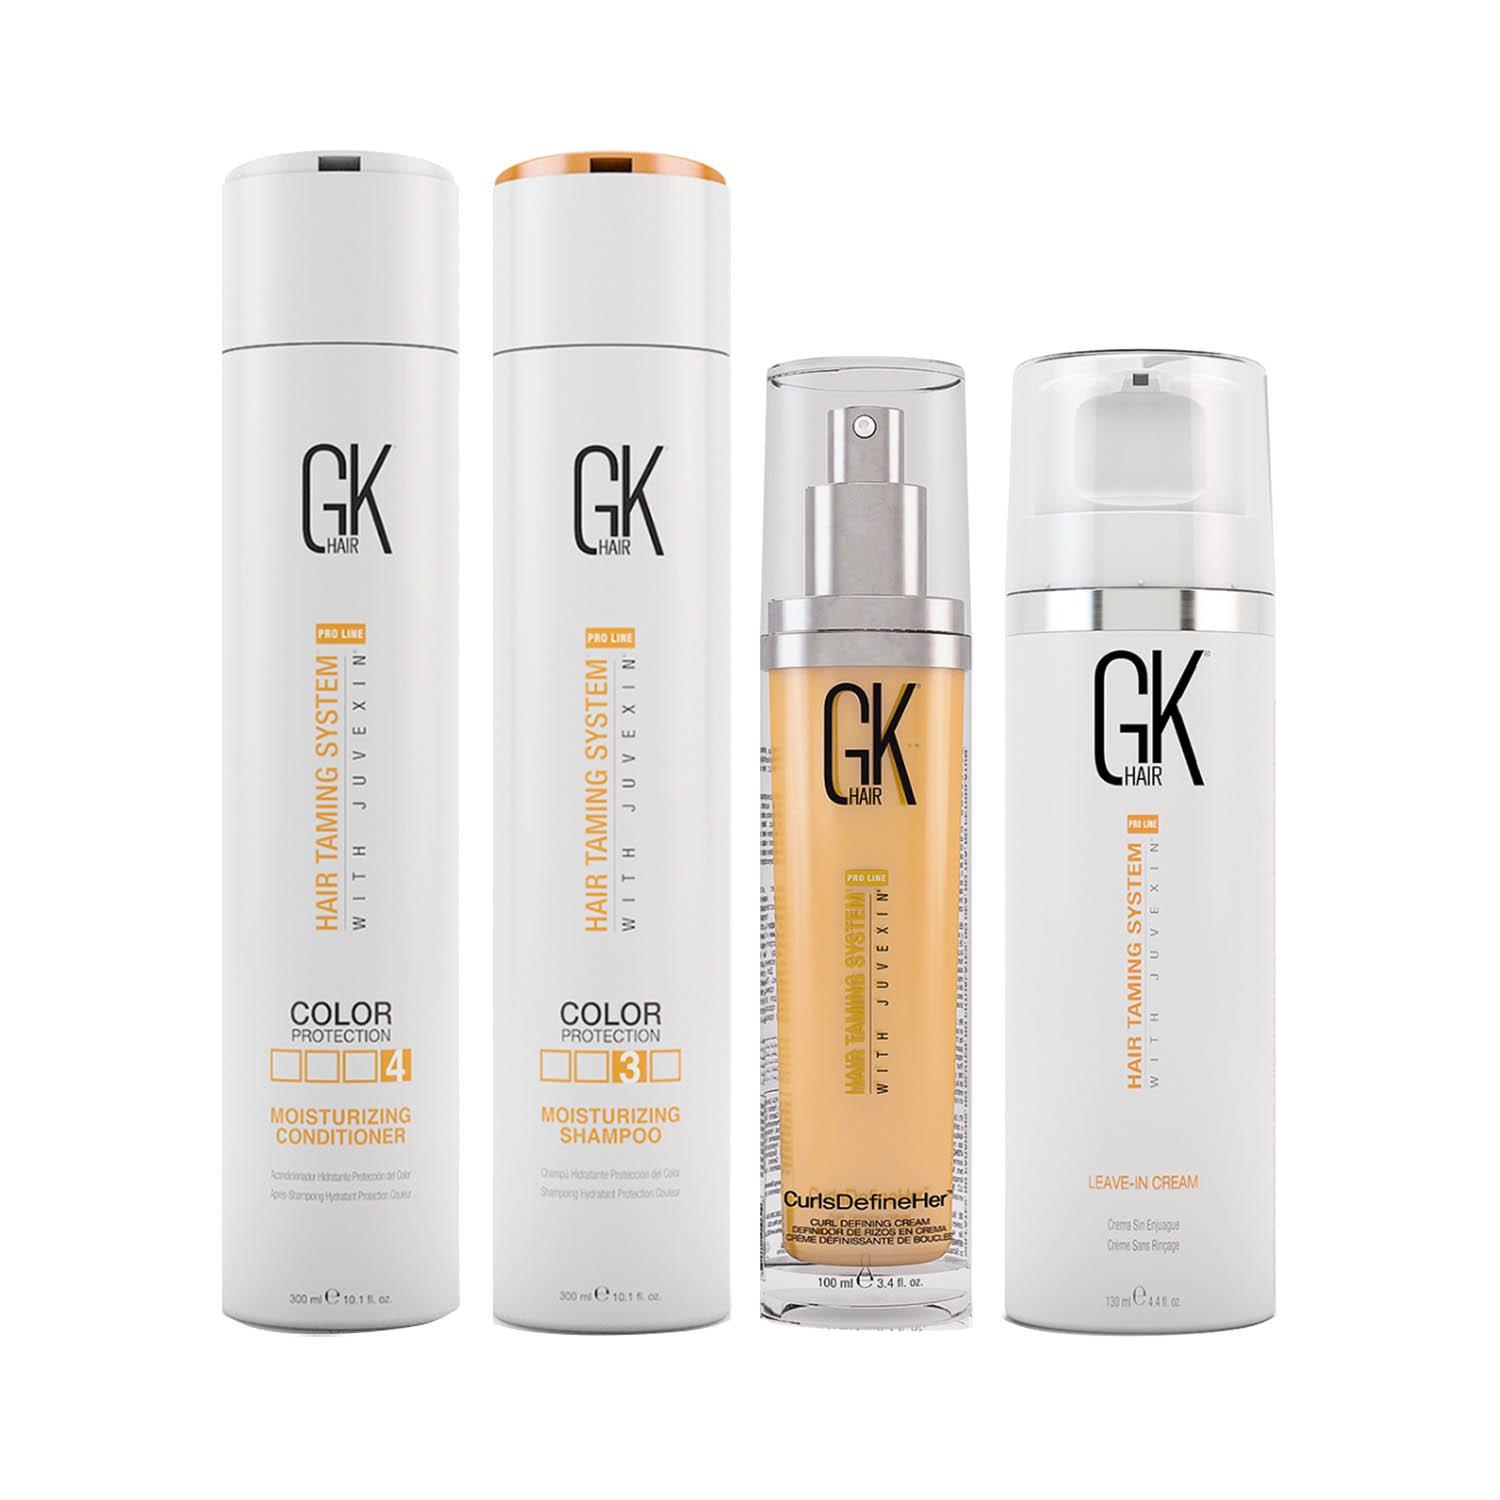 GK Hair | GK Hair Moisturizing Shampoo and Conditioner,Curls Defineher Cream, leave-in Conditioner Spray Combo